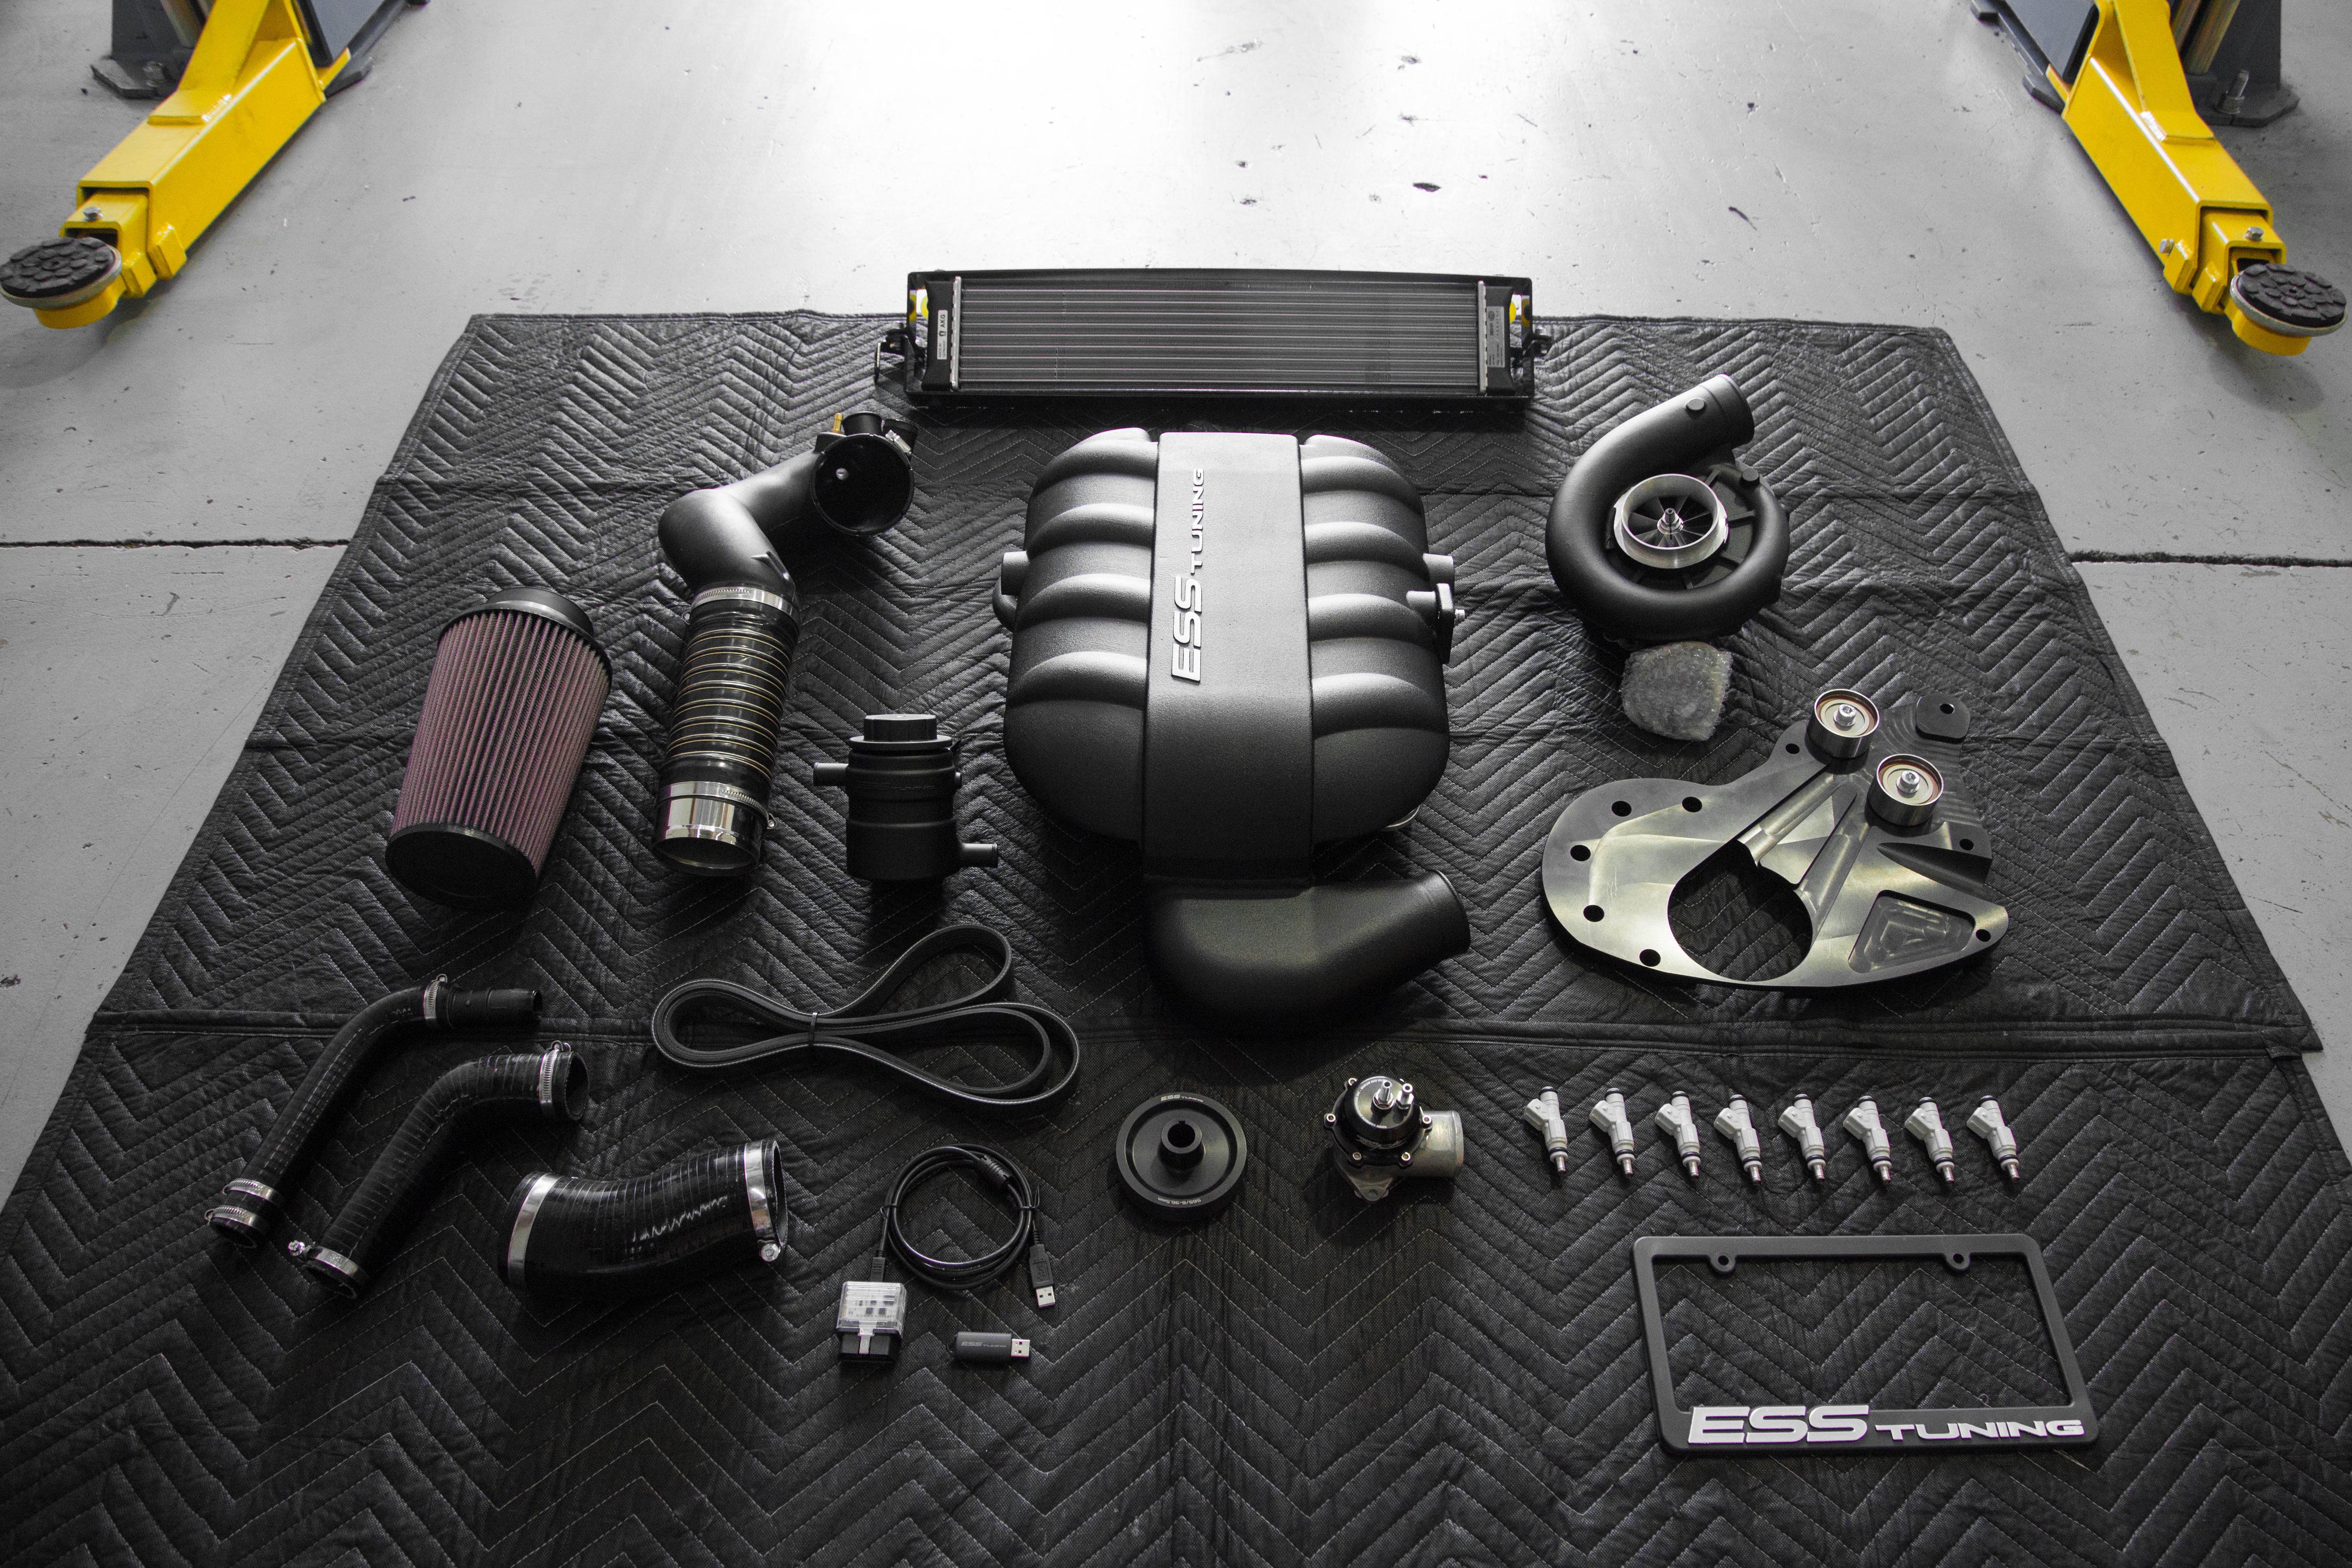 ESS Tuning Supercharged E92 M3 - Parts Score